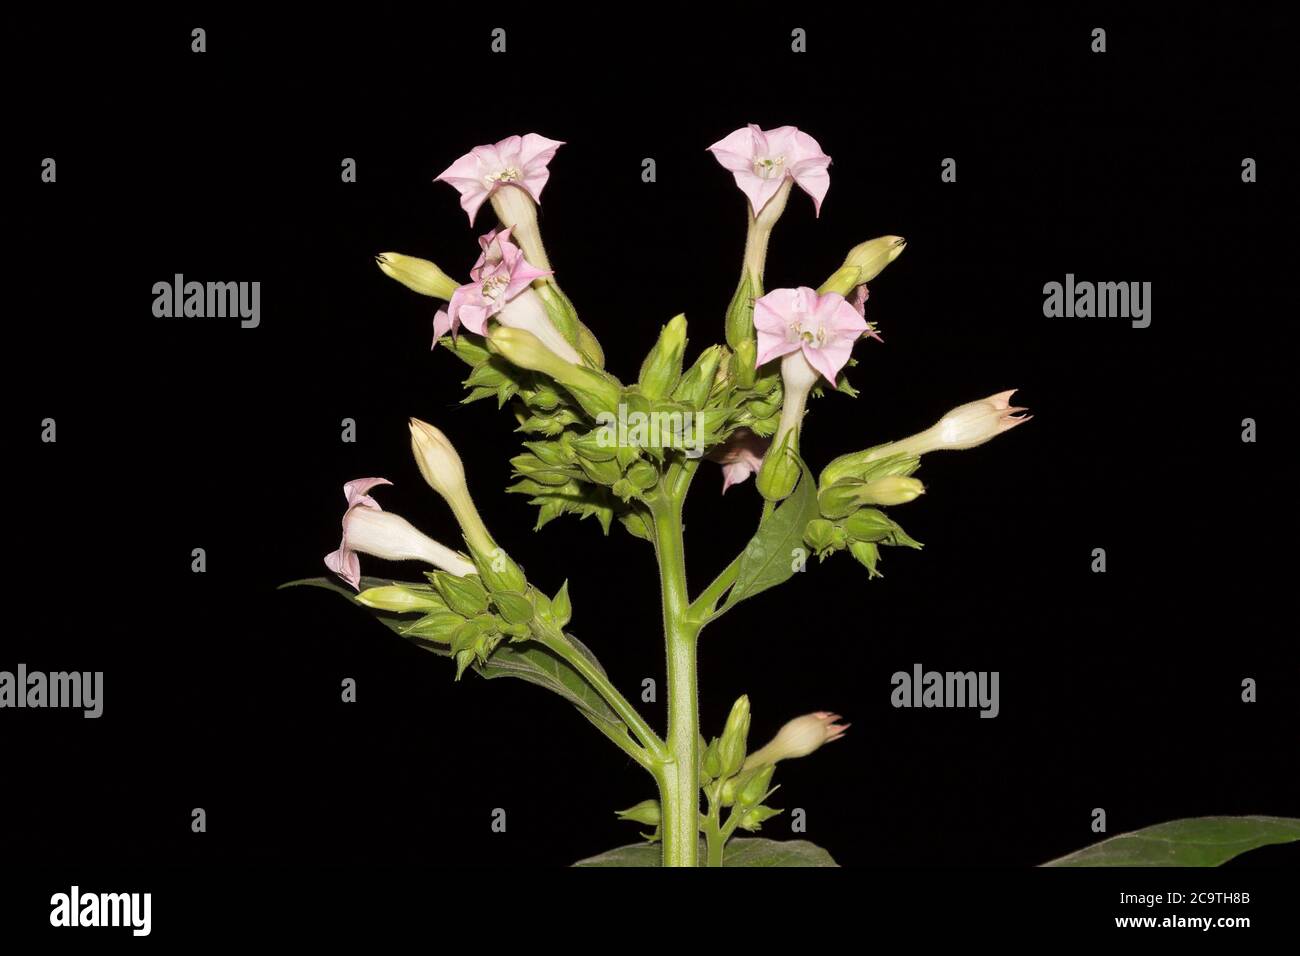 Blossoms of the tobacco plant Nicotiana tabacum Stock Photo